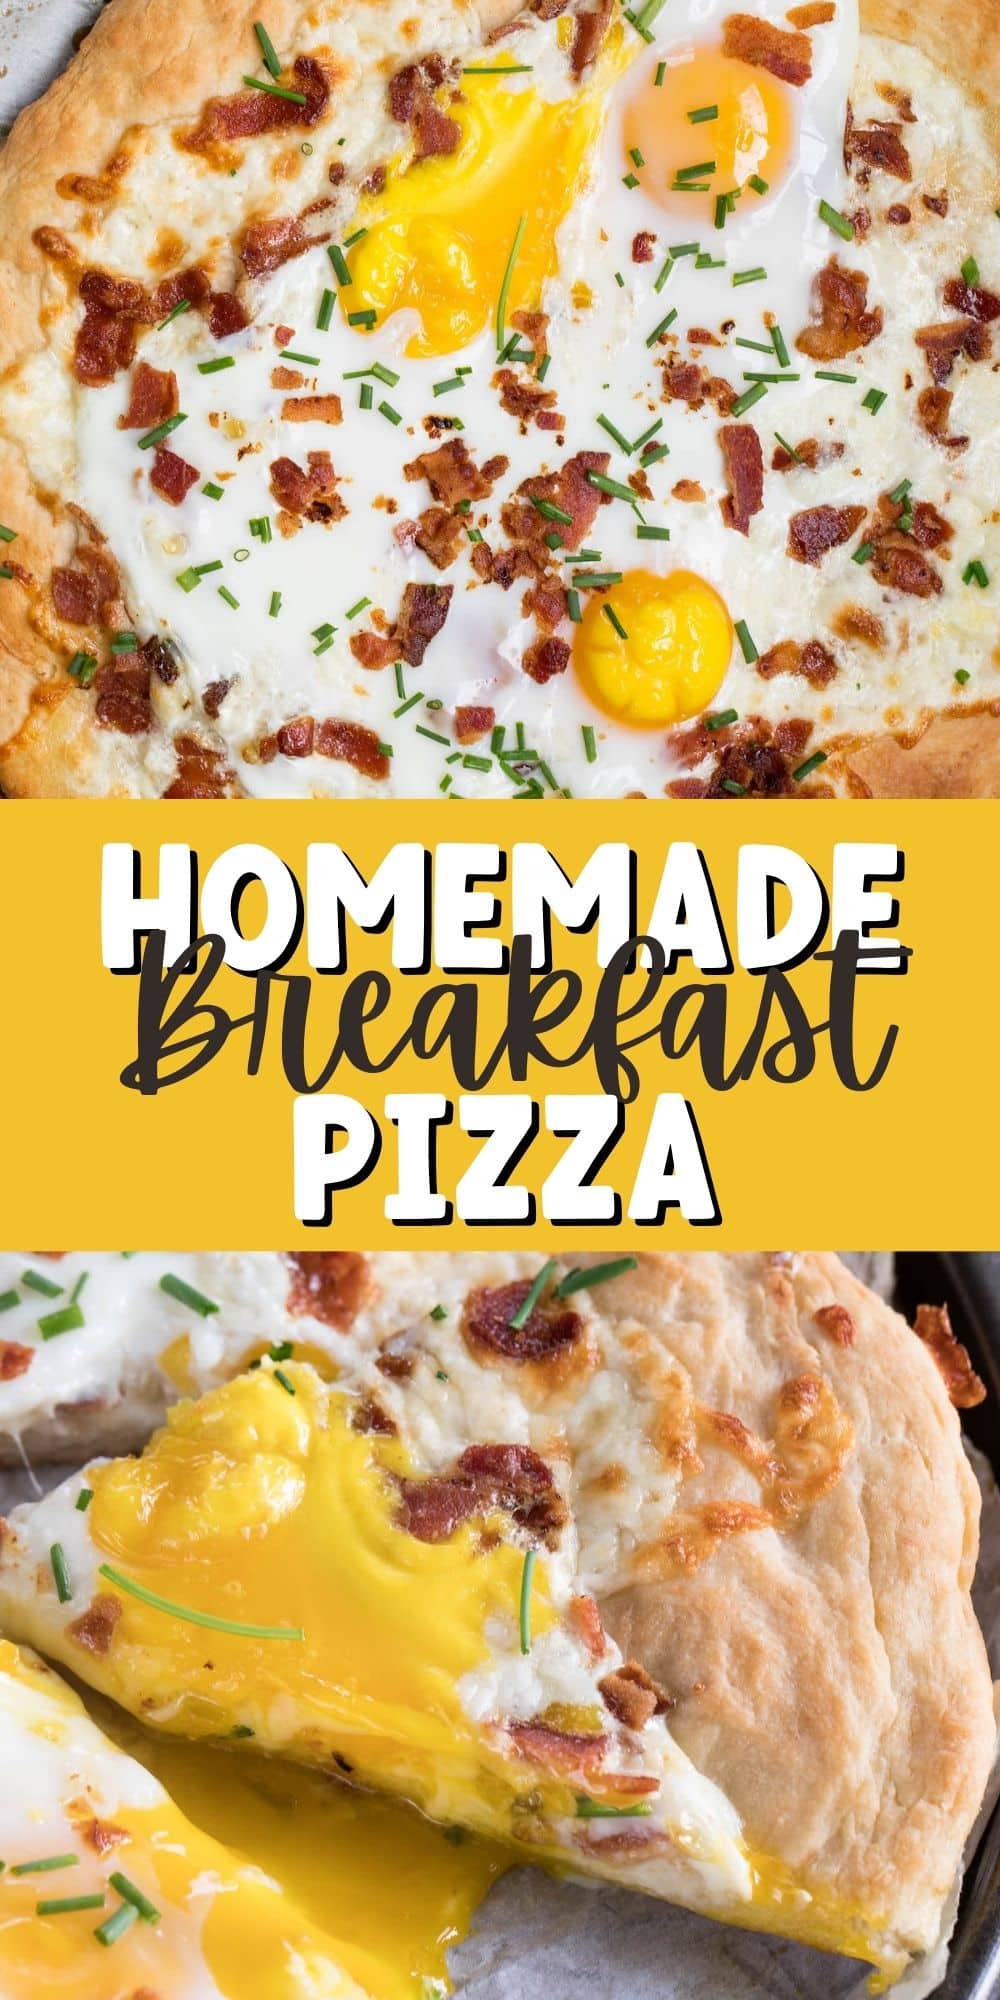 two photos of pizza with bacon and eggs on top and words on the image